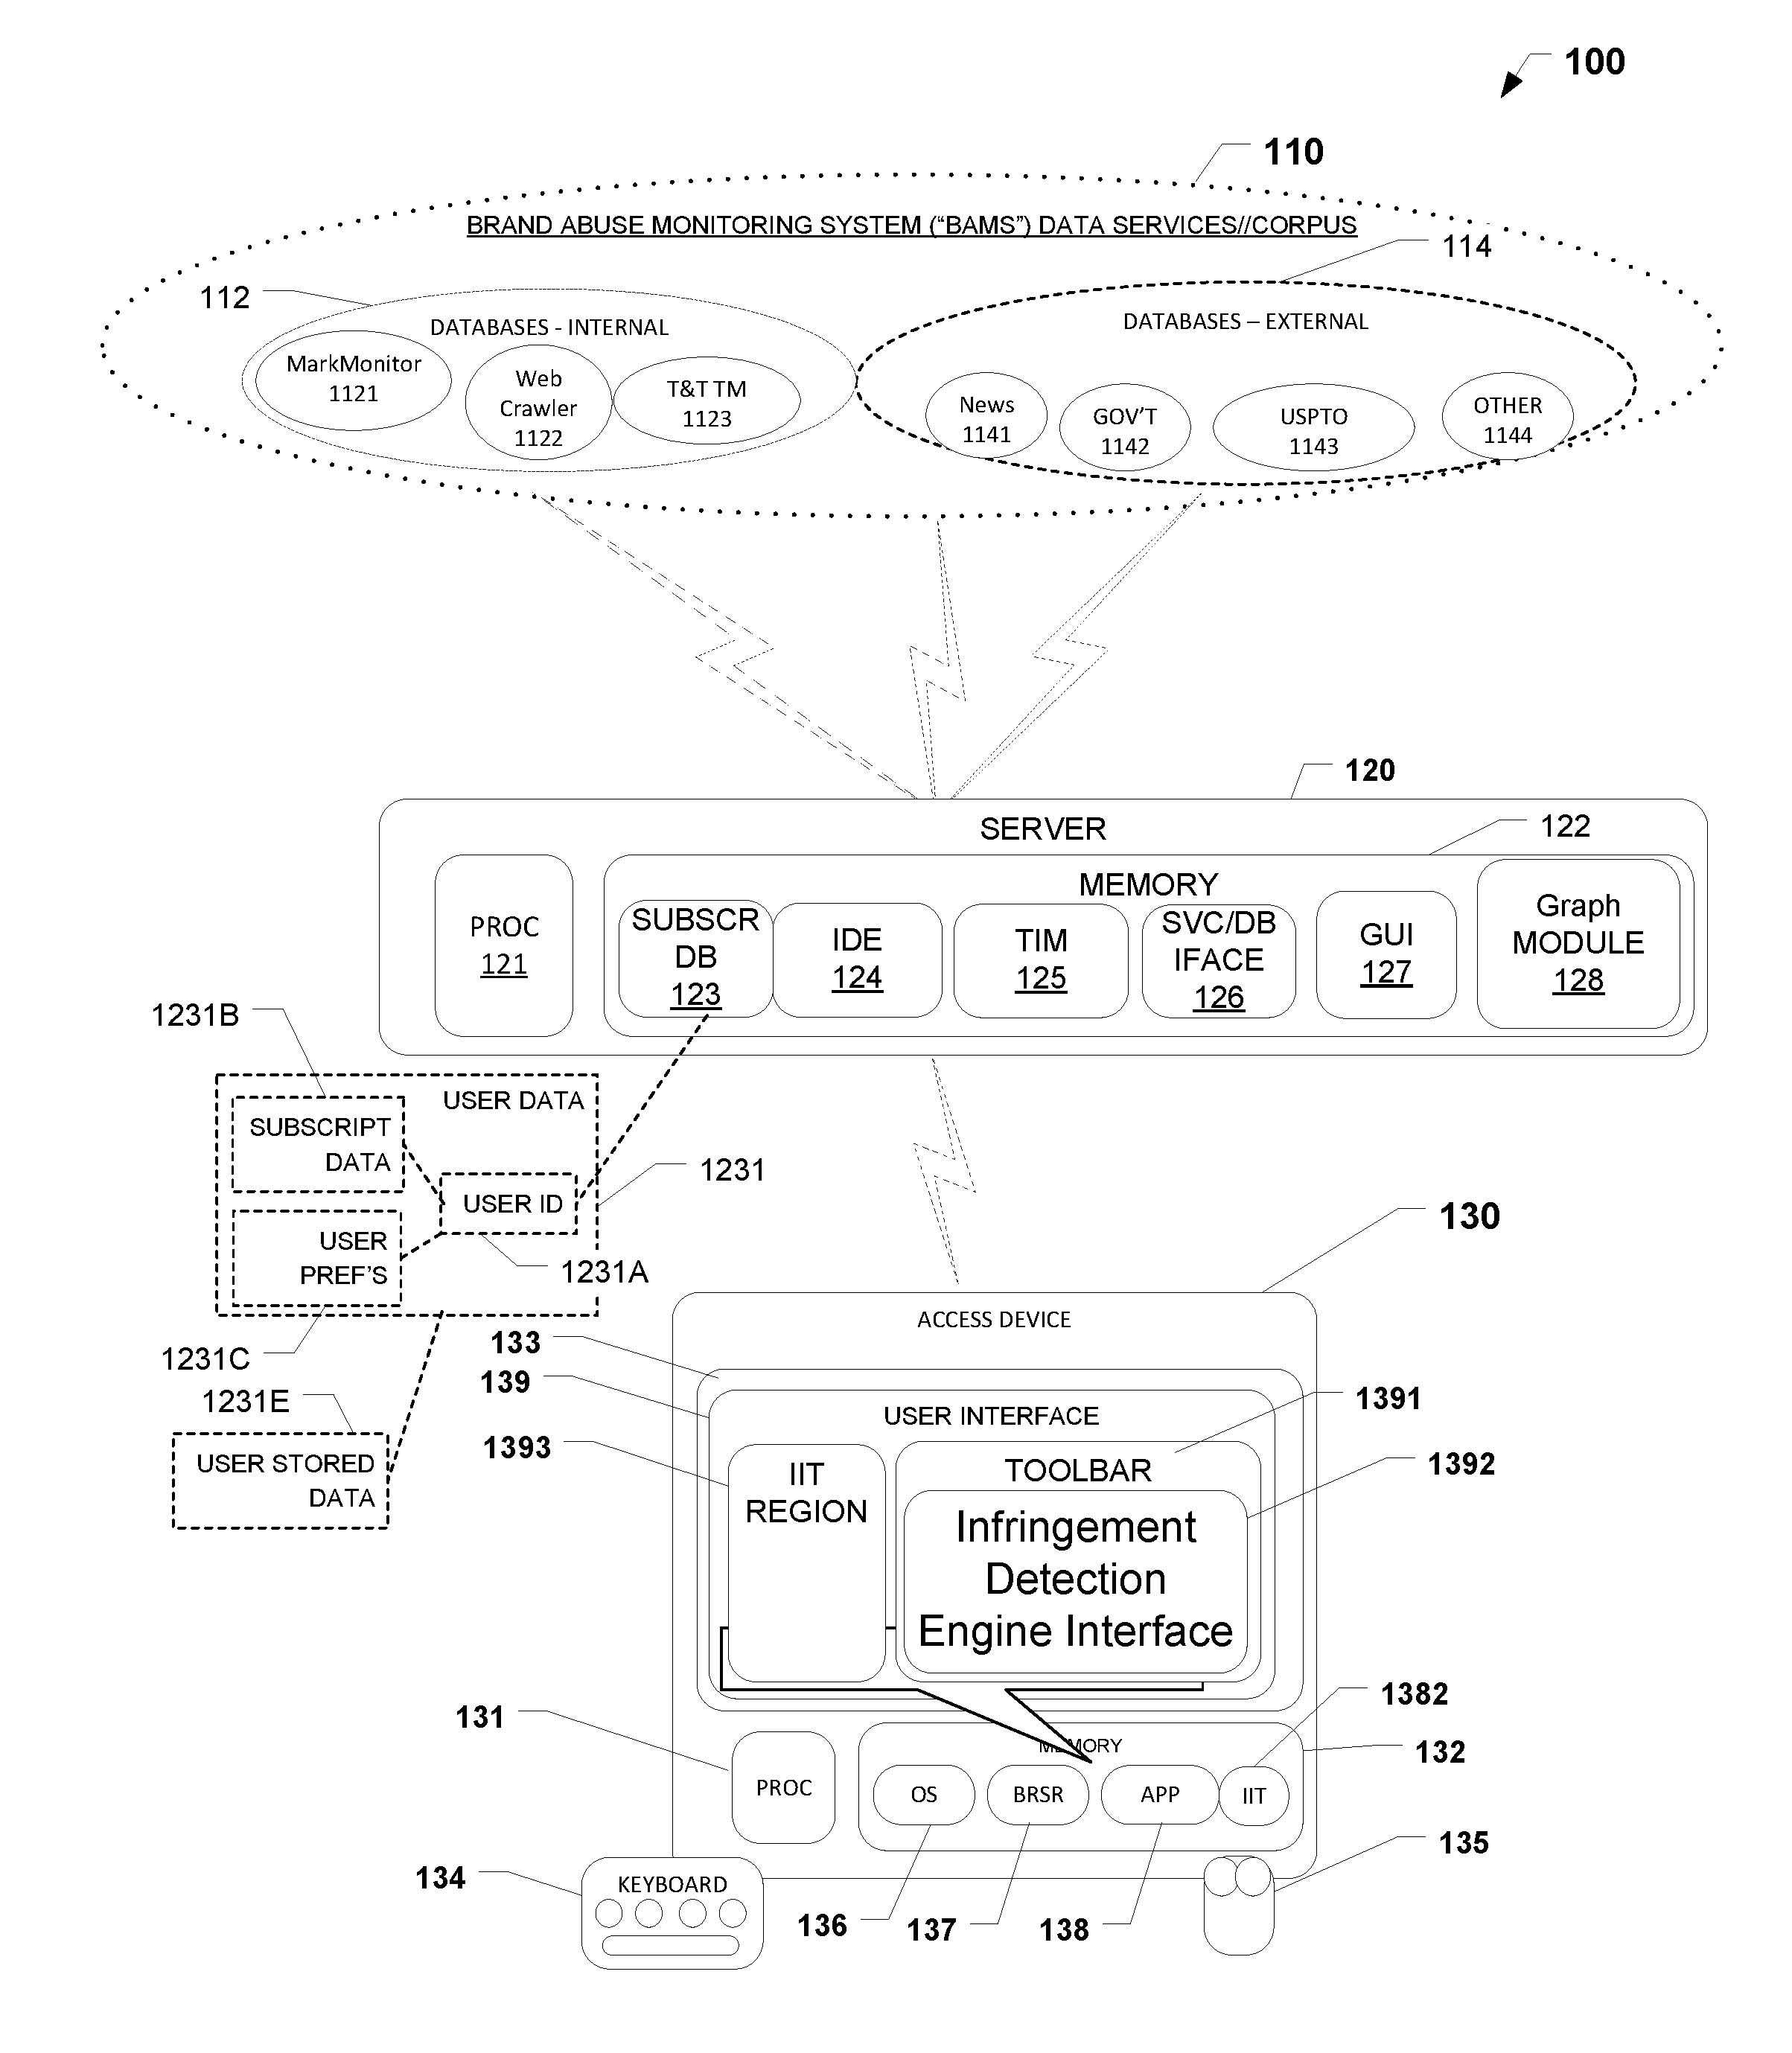 Brand abuse monitoring system with infringement deteciton engine and graphical user interface